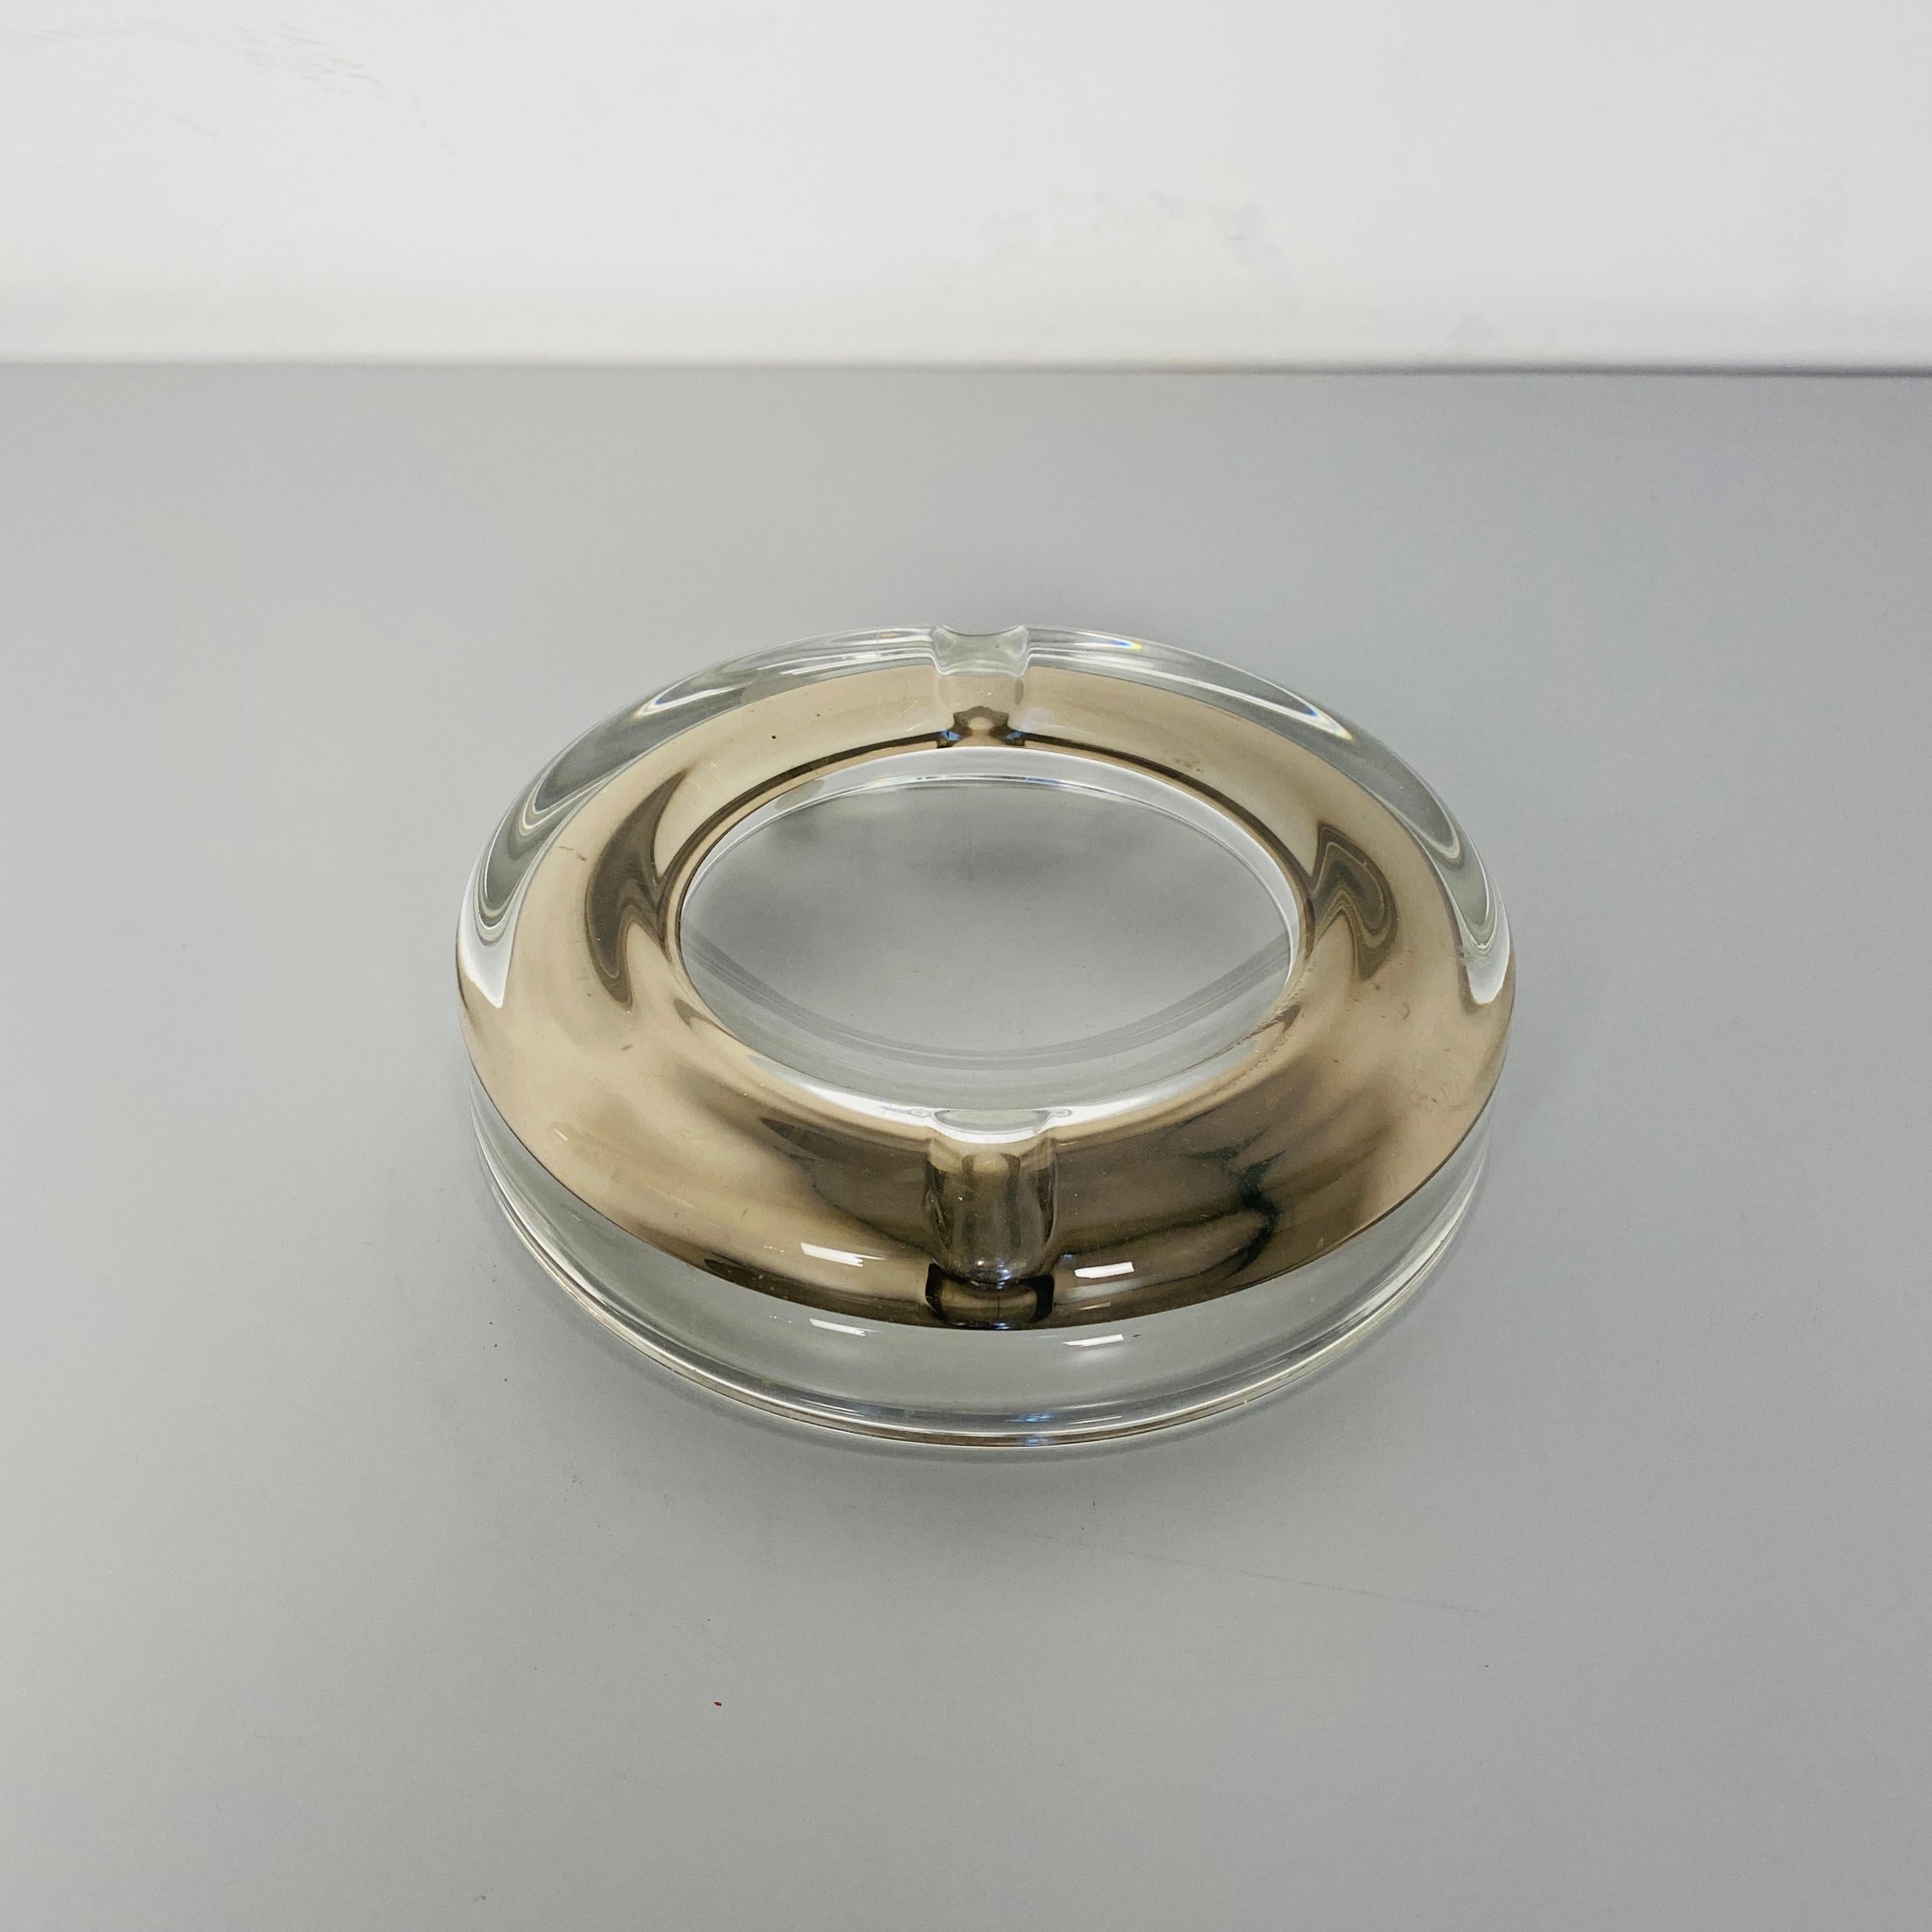 Late 20th Century Italian Mid-Century Modern Glass Ashtray with Internal Decoration, 1970s For Sale